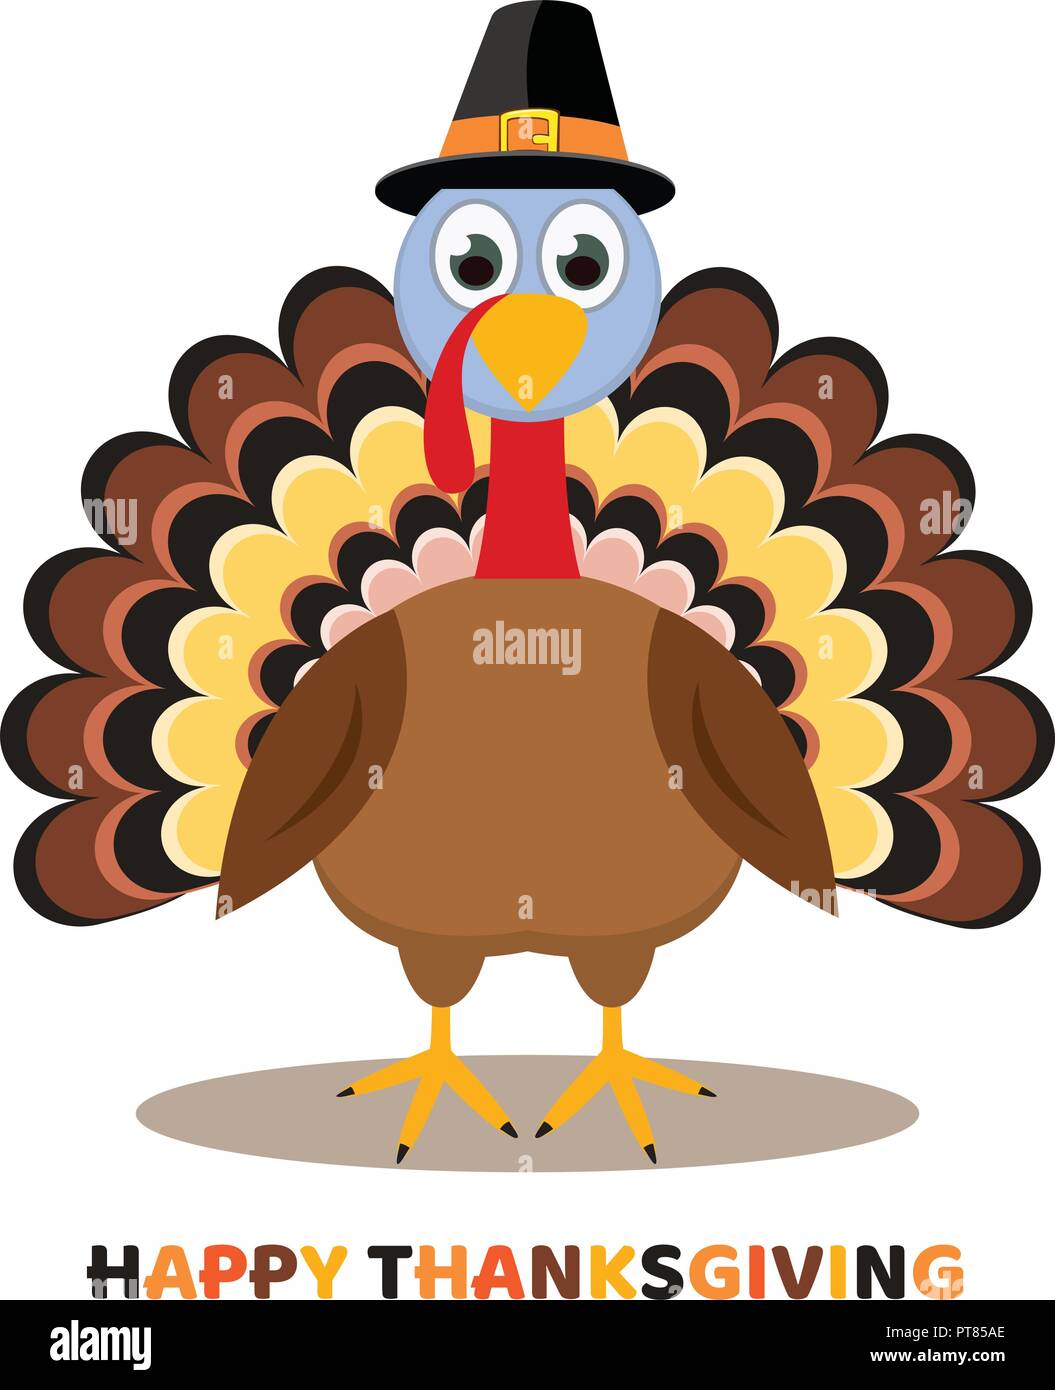 vector card for thanksgiving day with cartoon turkey bird. happy thanksgiving colorful text Stock Vector